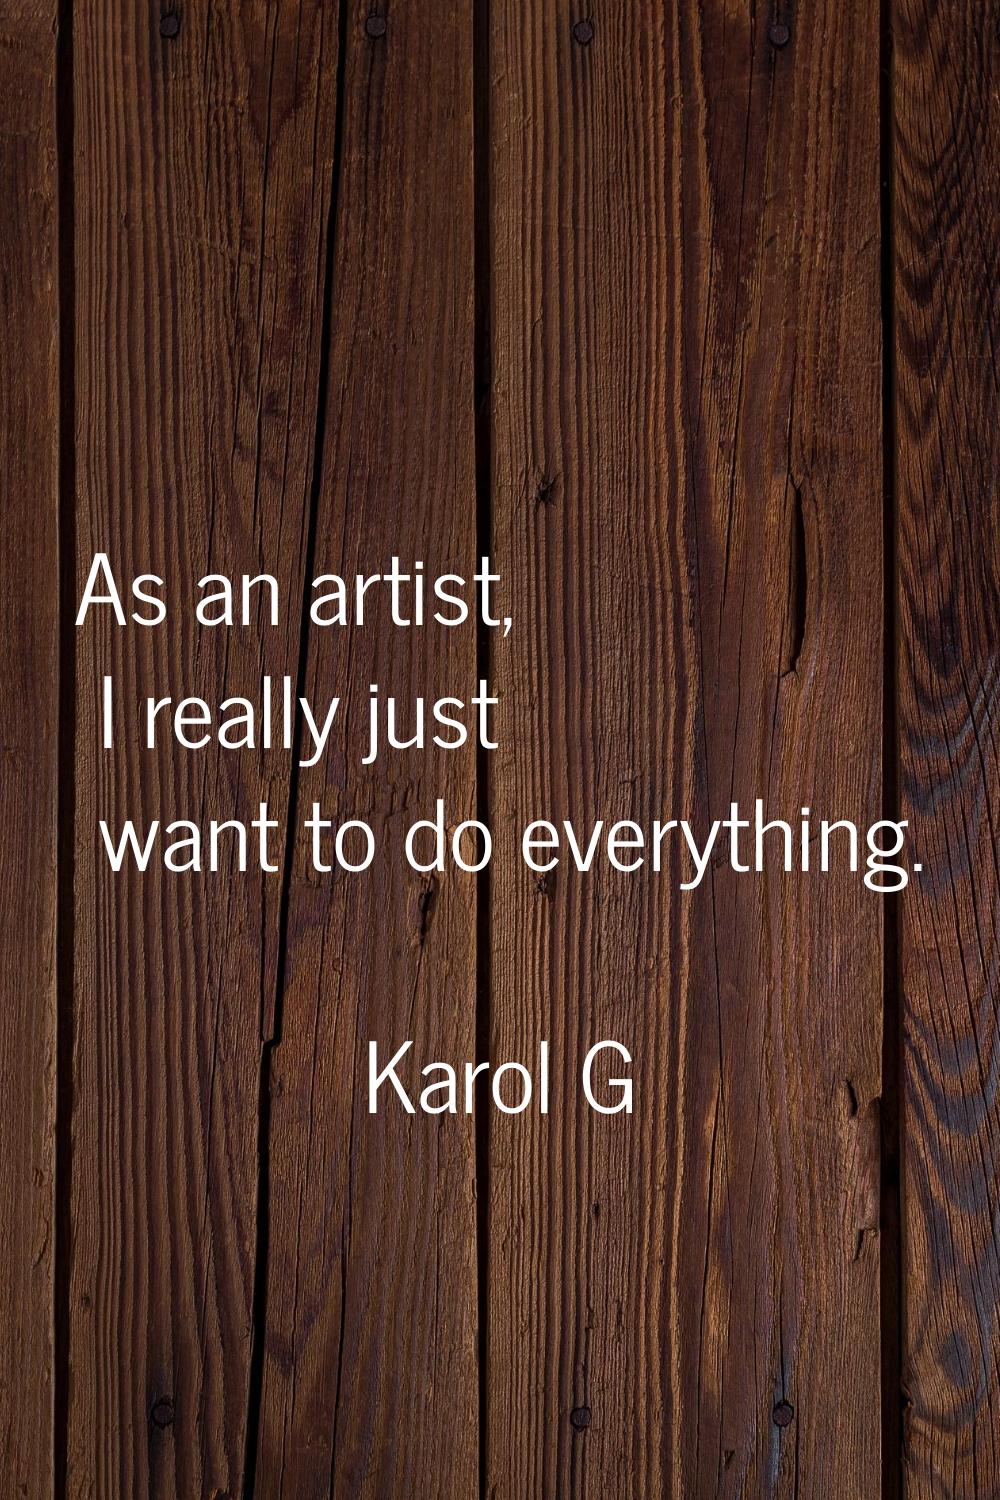 As an artist, I really just want to do everything.